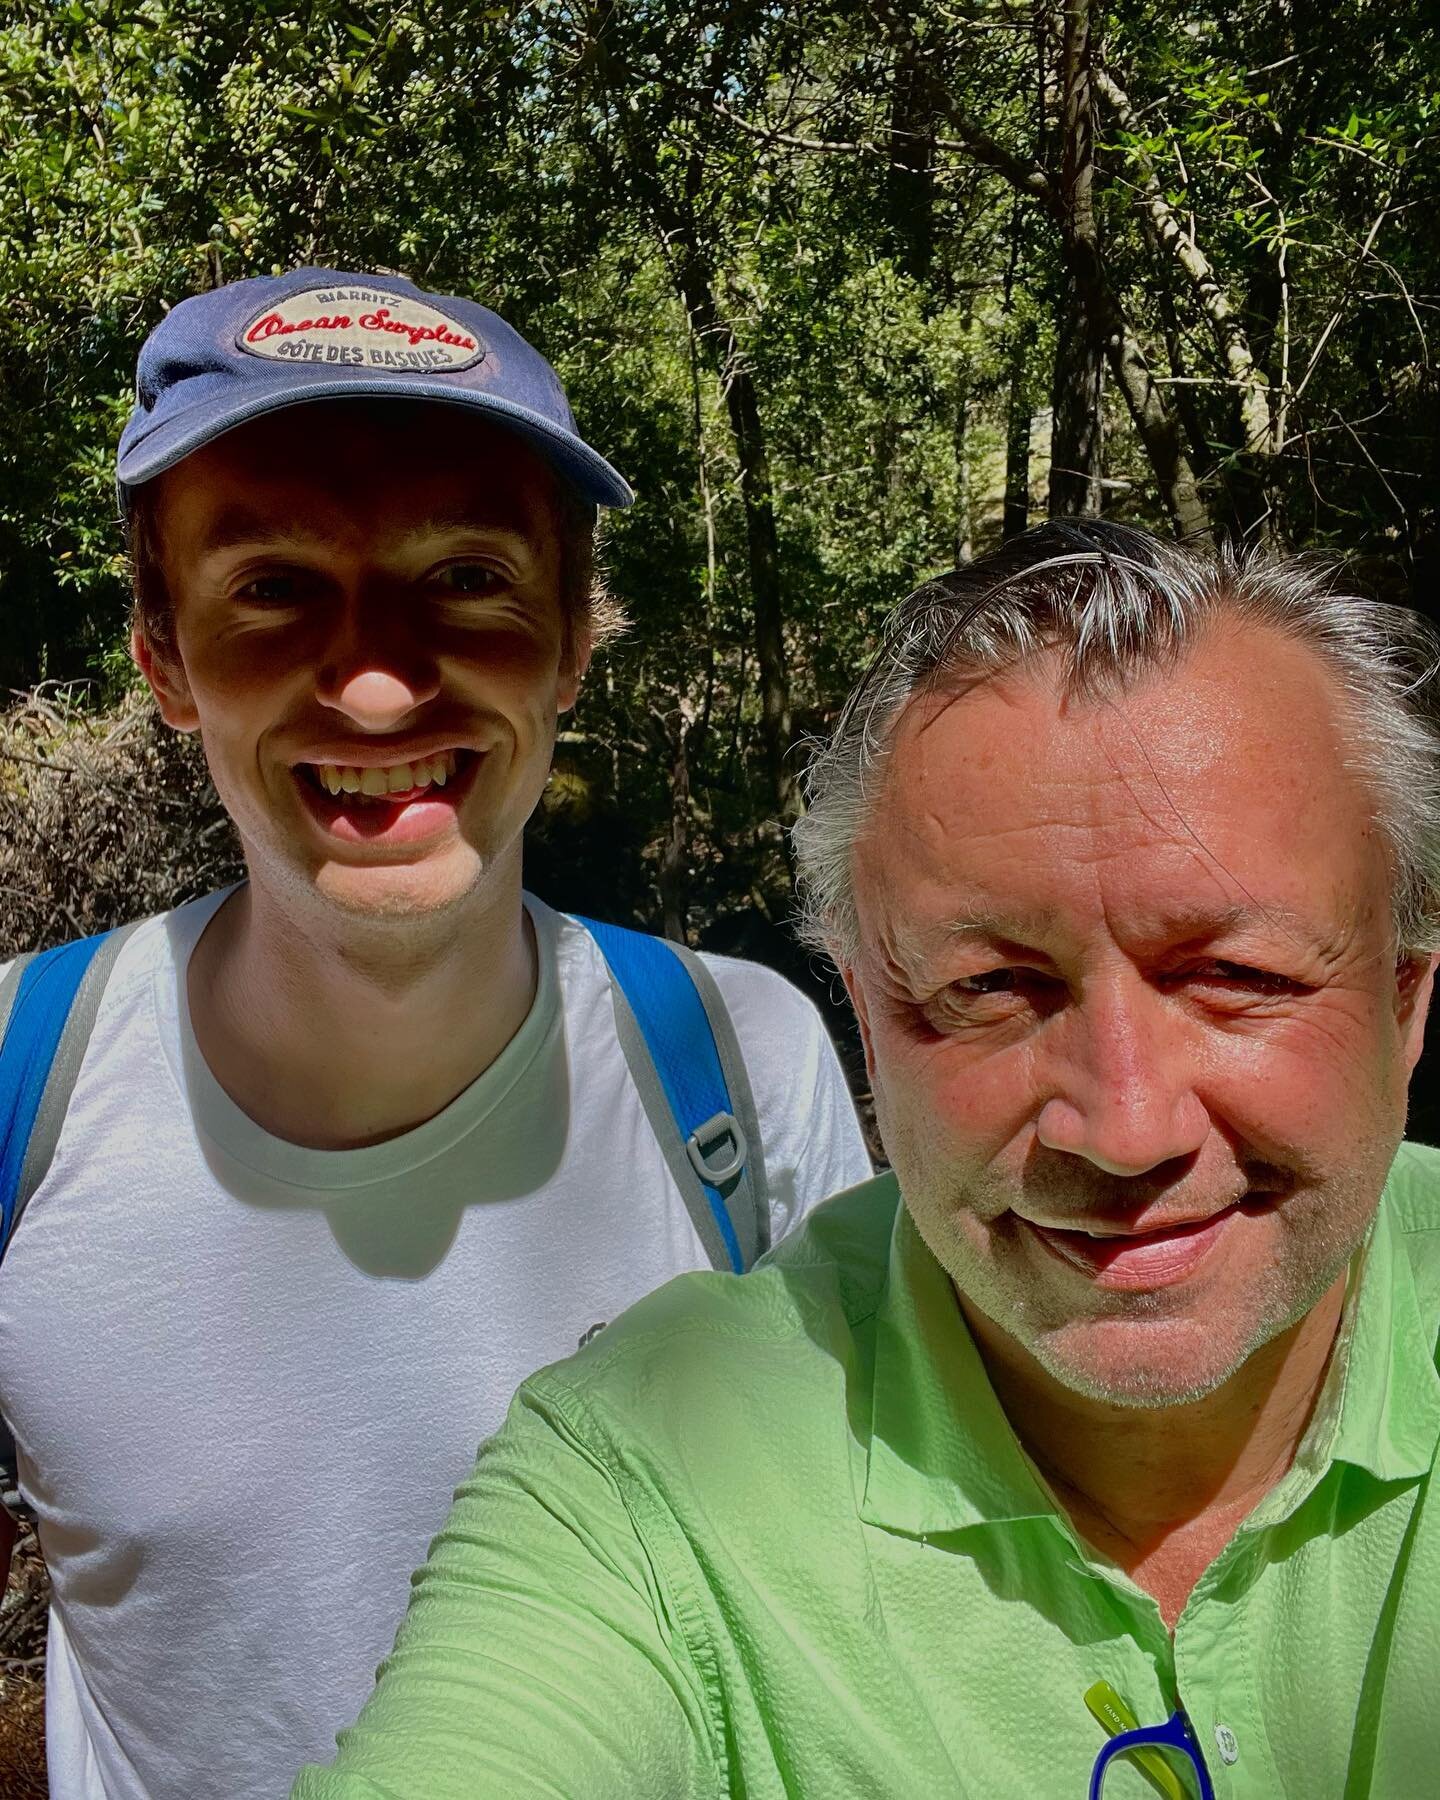 Allays happy to have @nikolas.mnrq with us at home 
Hike tradition  @mt.tamalpais in our backyard 🤩🤩🤩

#familytime 
#hikelovers 
#marincountylife 
#california 
#fatherson